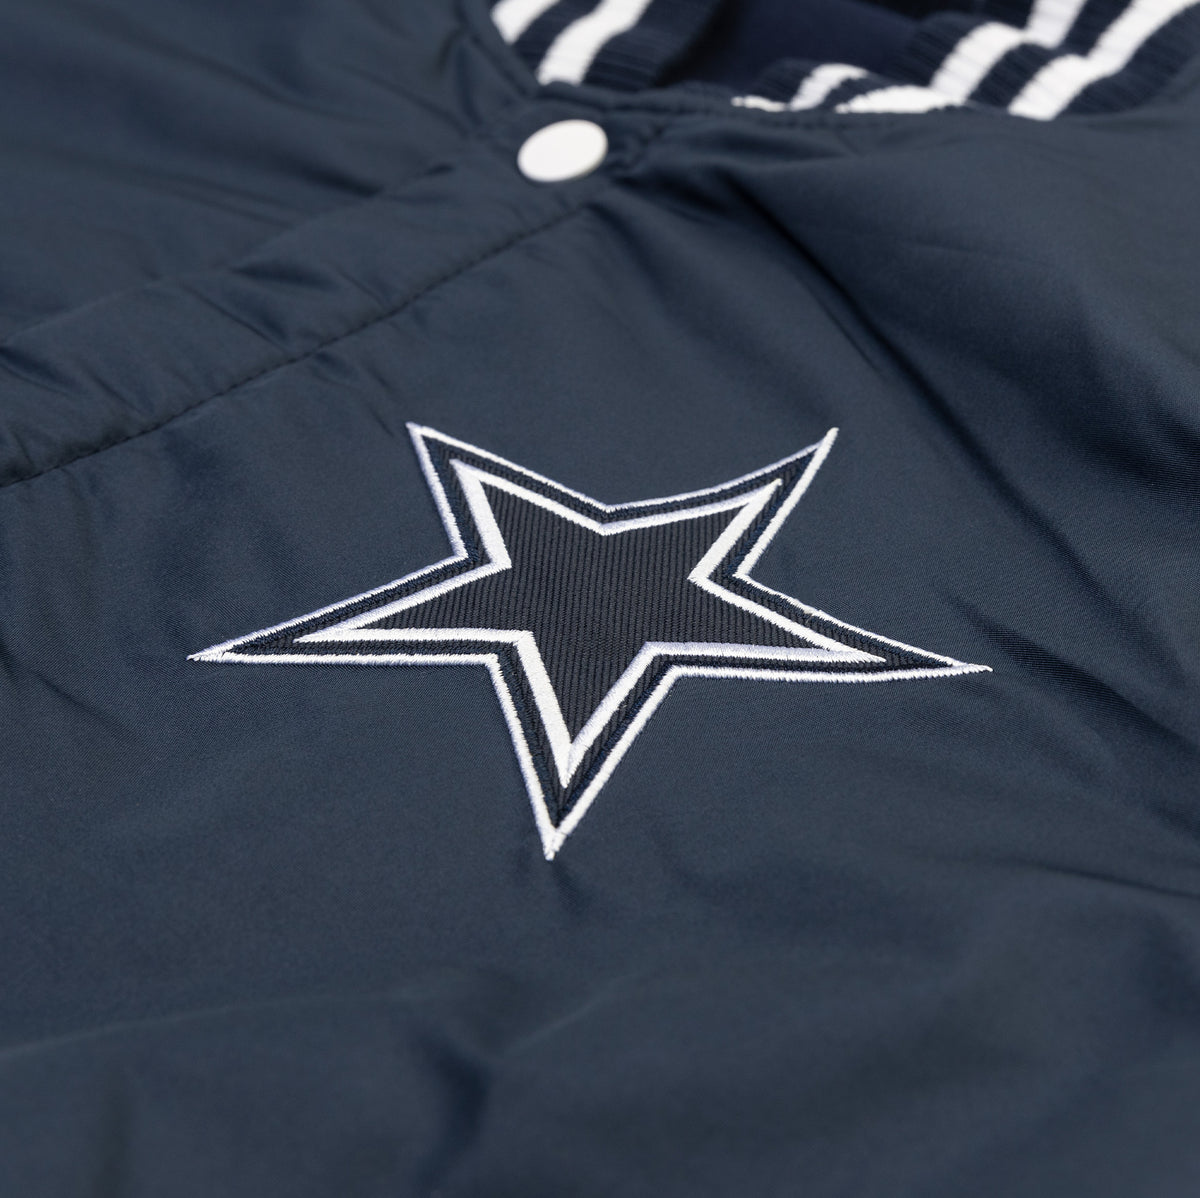 dallas cowboys mitchell and ness jacket